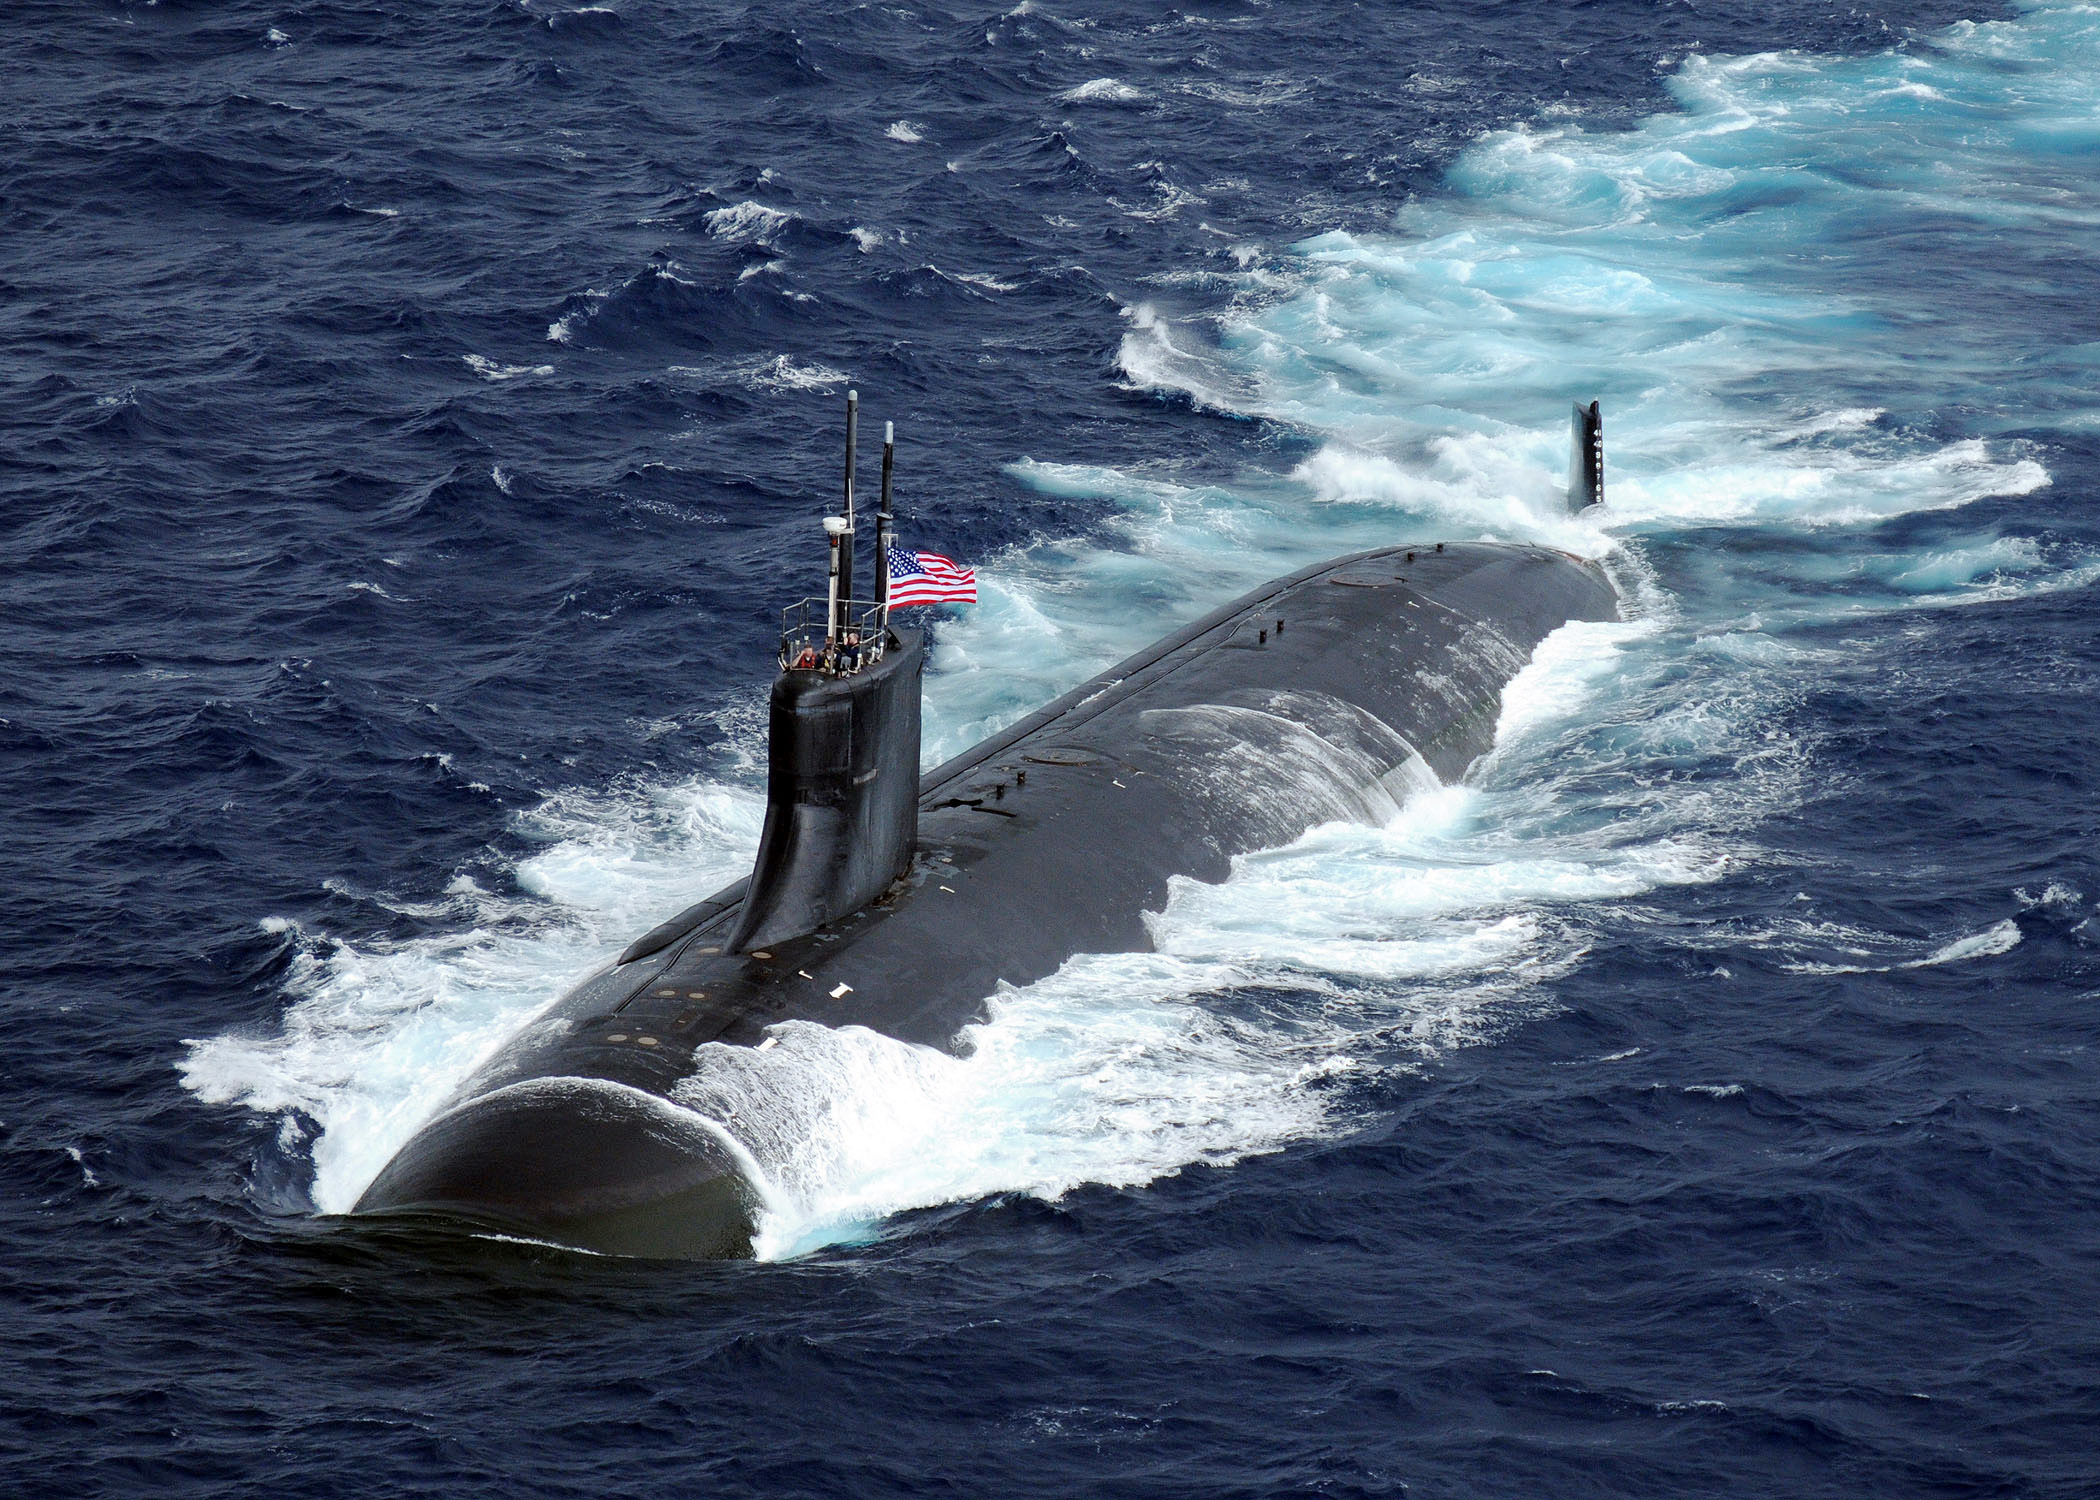 US_Navy_091117-N-6720T-373_The_Seawolf-class_attack_submarine_USS_Connecticut_(SSN_22)_is_underway_in_the_Pacific_Ocean.jpg